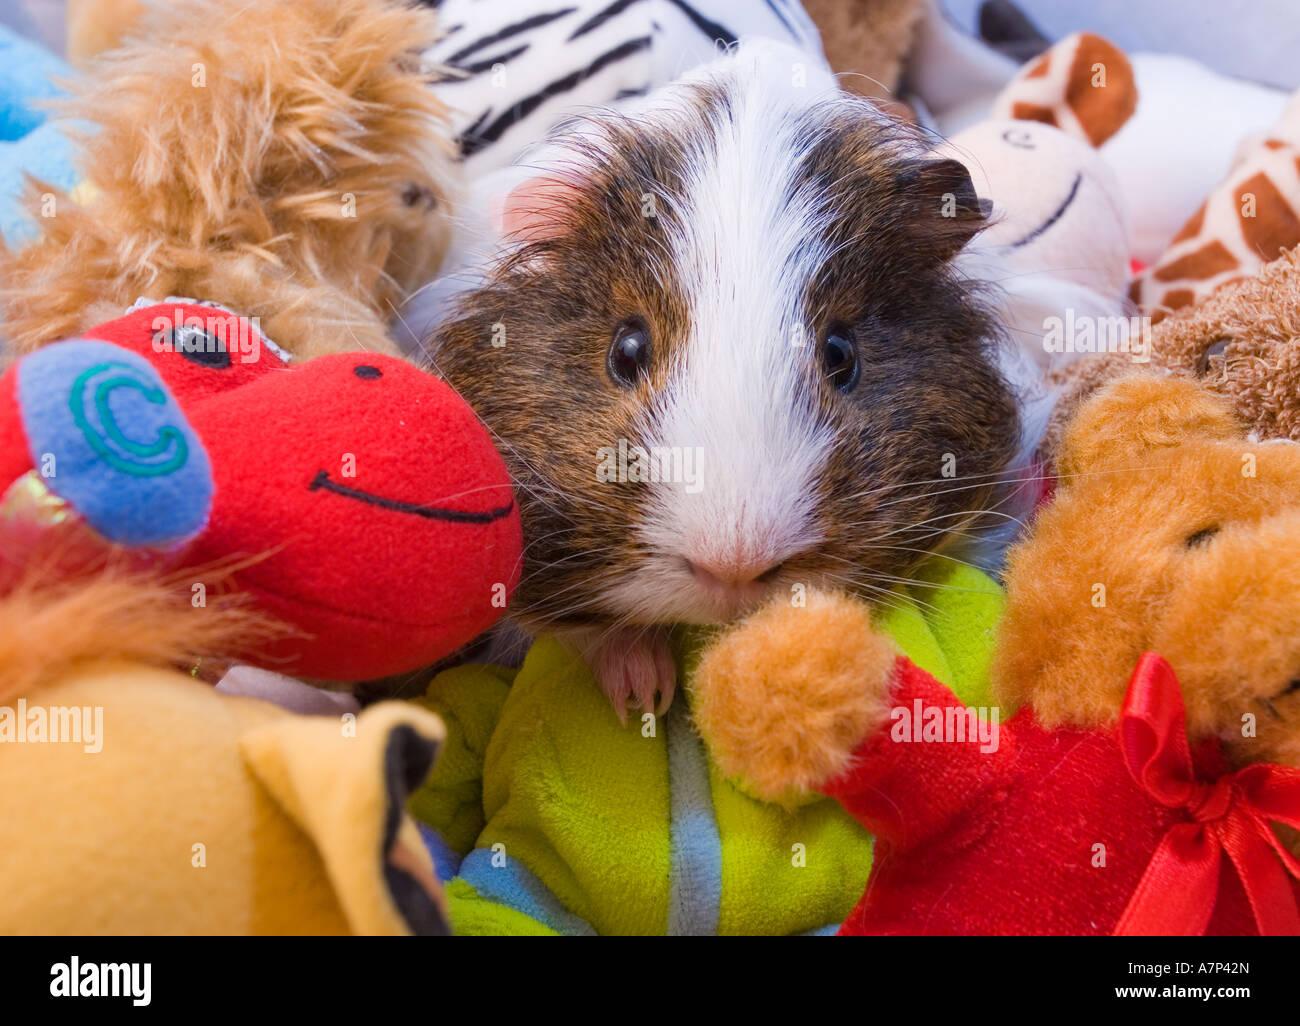 Guinea Pig Amongst childrens funny toys Stock Photo